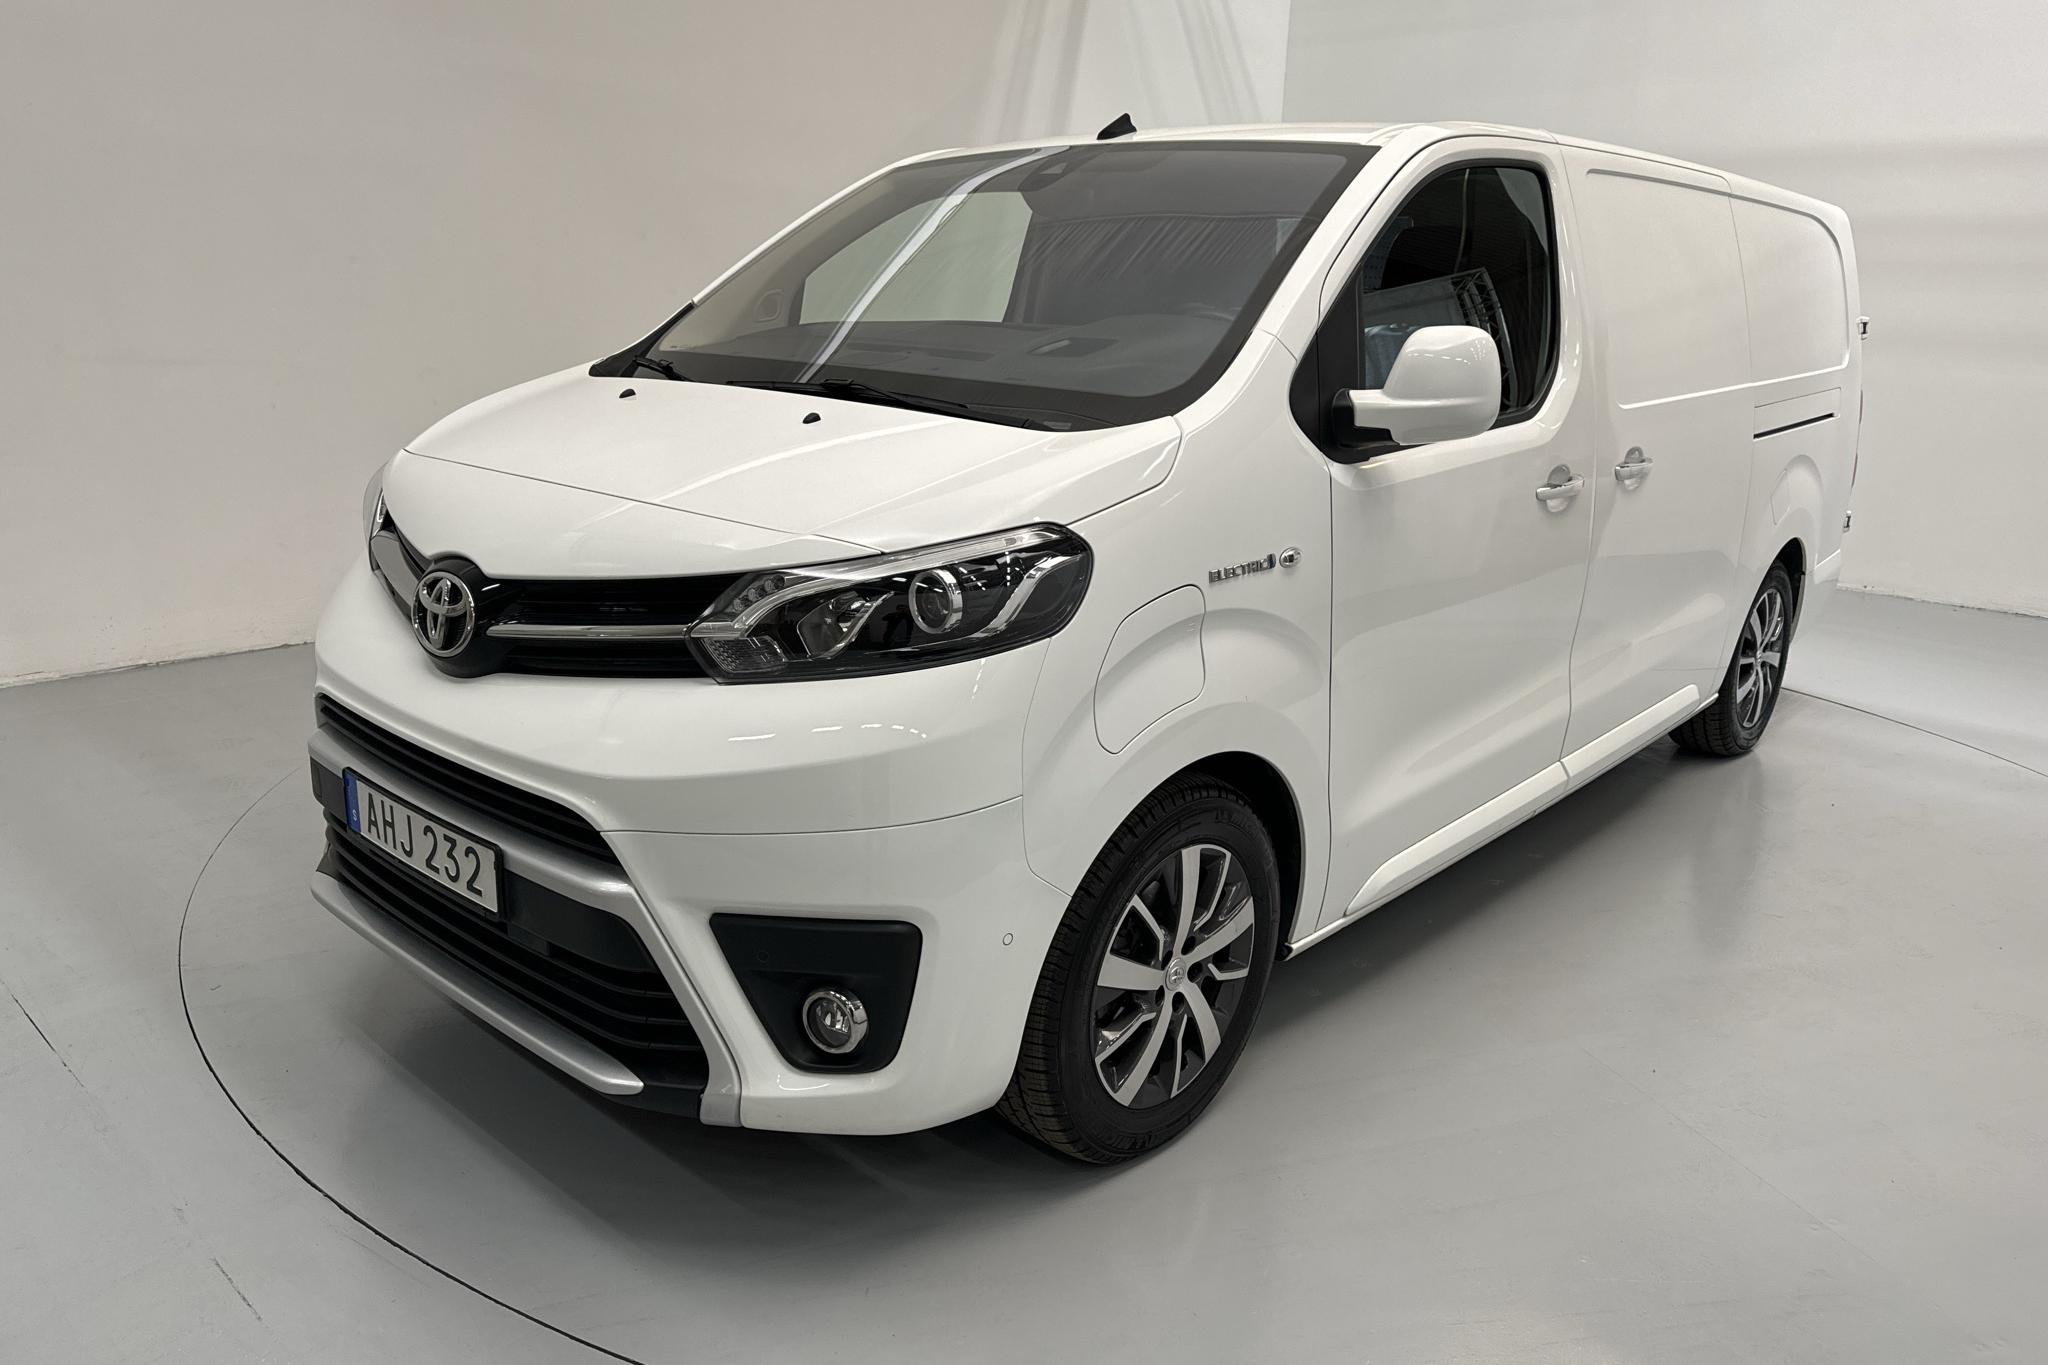 Toyota PROACE Verso Electric Shuttle 50 kWh (136hk) - 12 560 km - Automatic - white - 2021